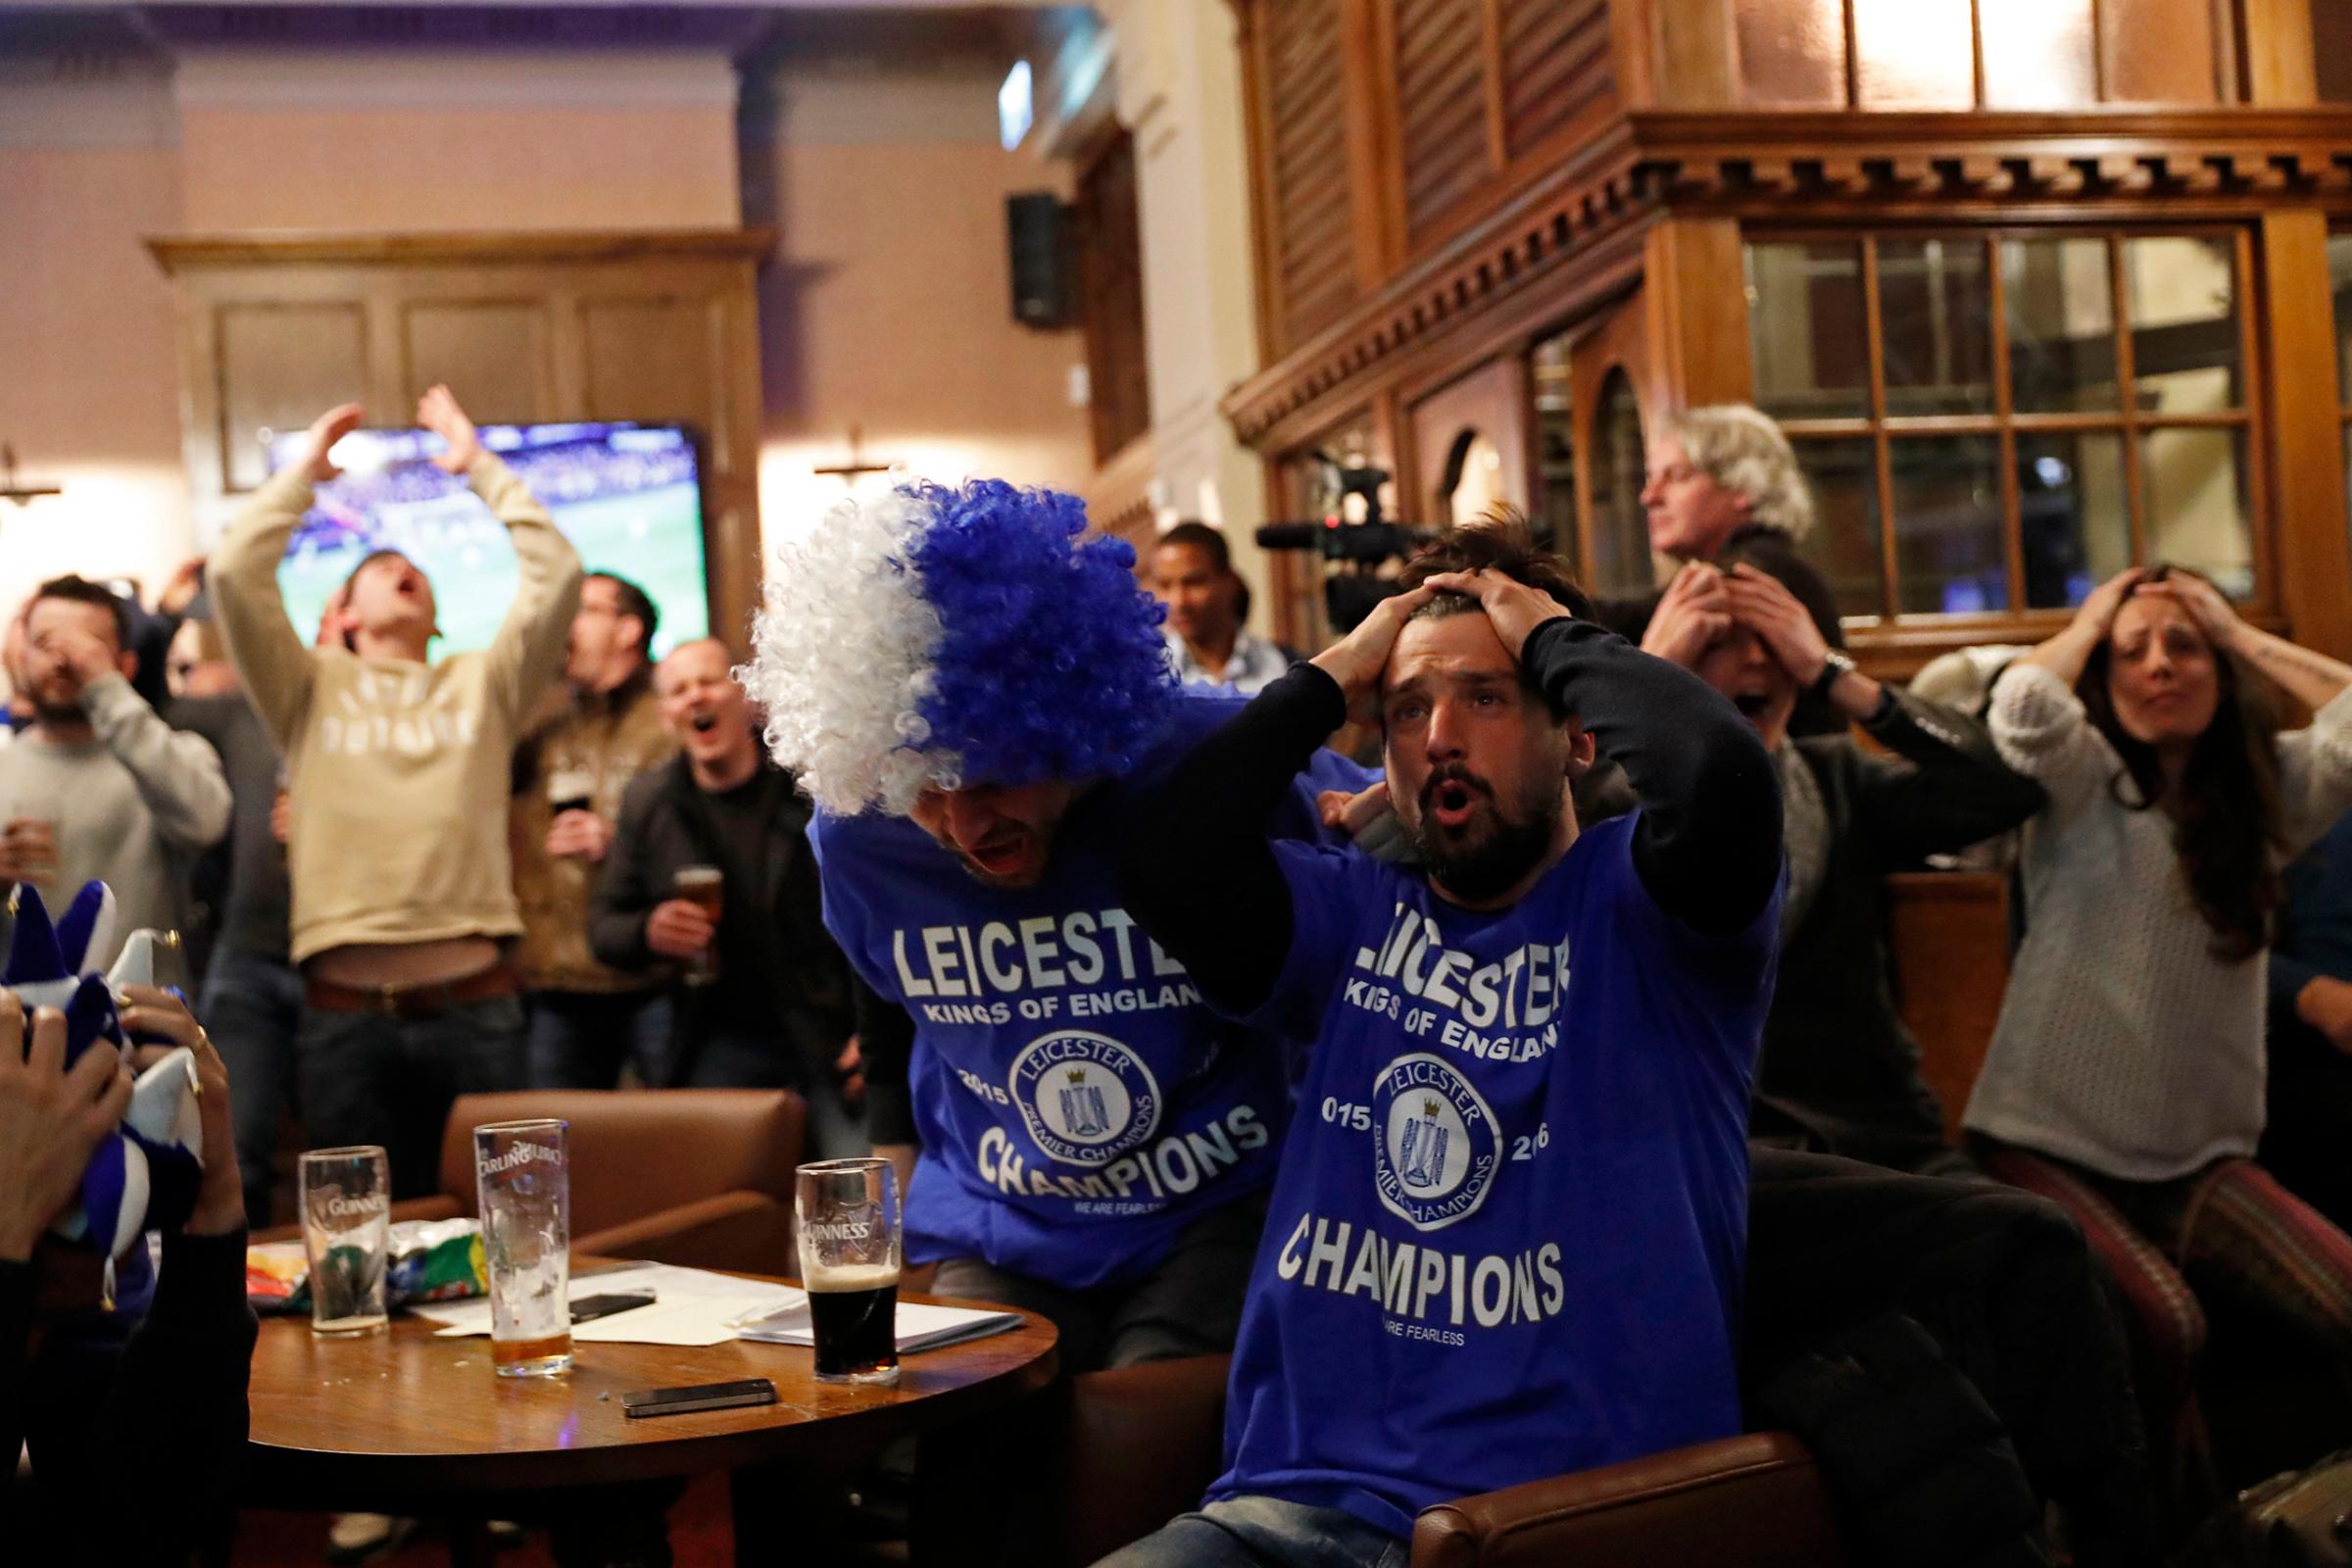 Leicester City fans watch the English Premier League match between Chelsea and Tottenham Hotspur at a pub in Leicester, eastern England, May 2, 2016.